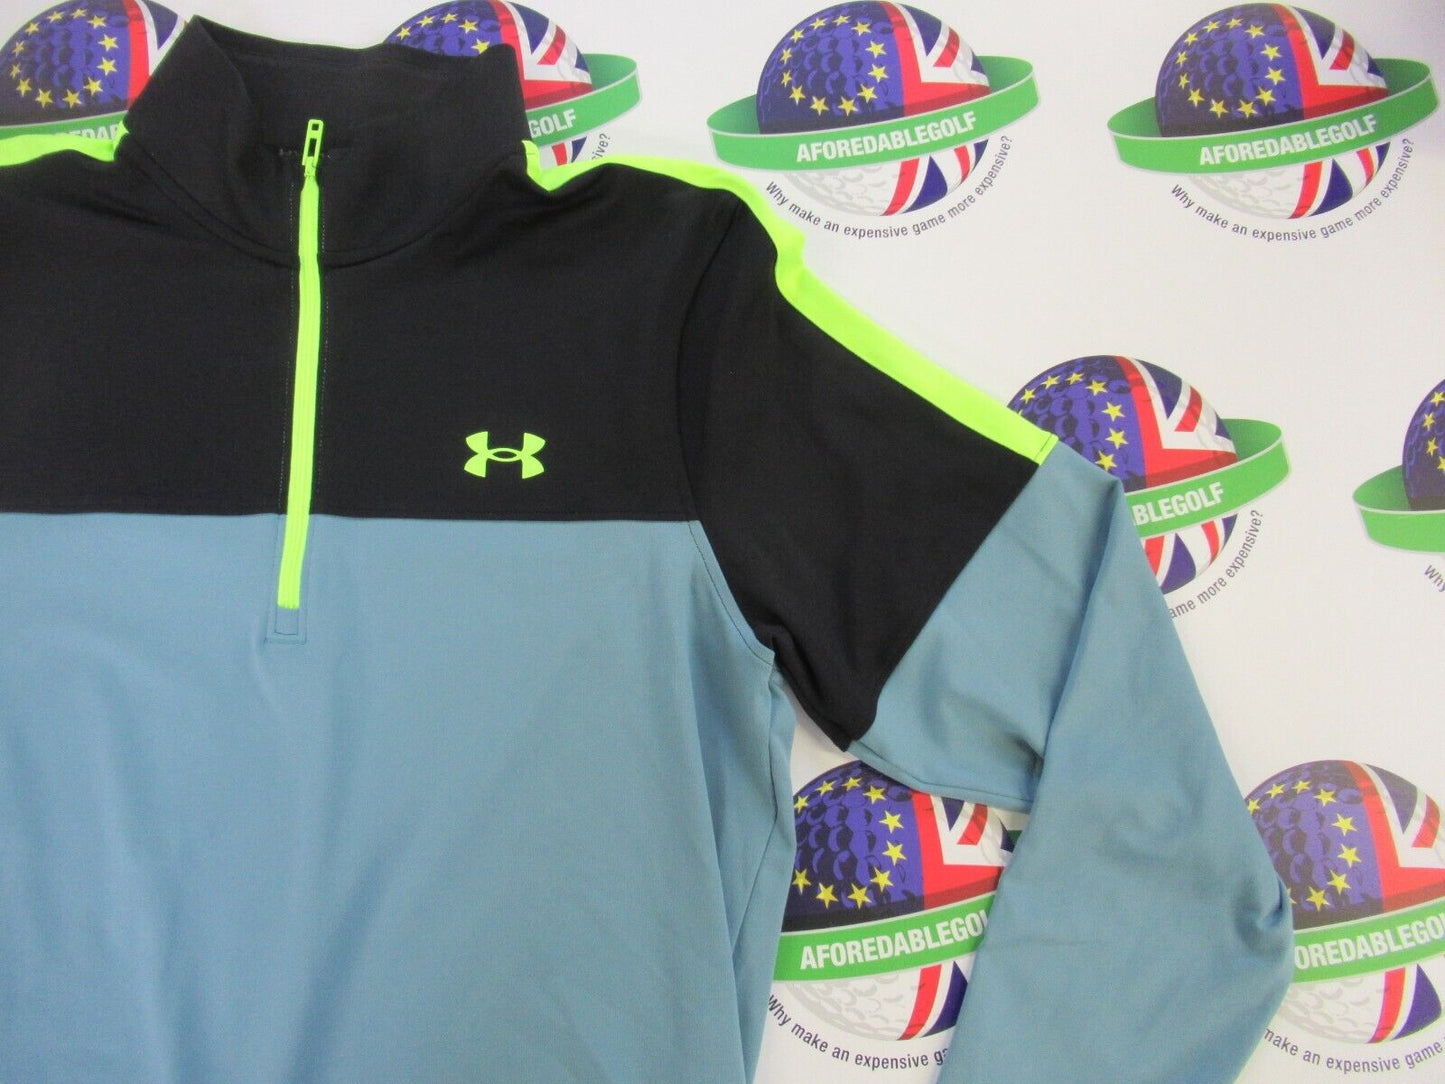 under armour storm midlayer 1/2 zip top black/yellow/still water uk size small